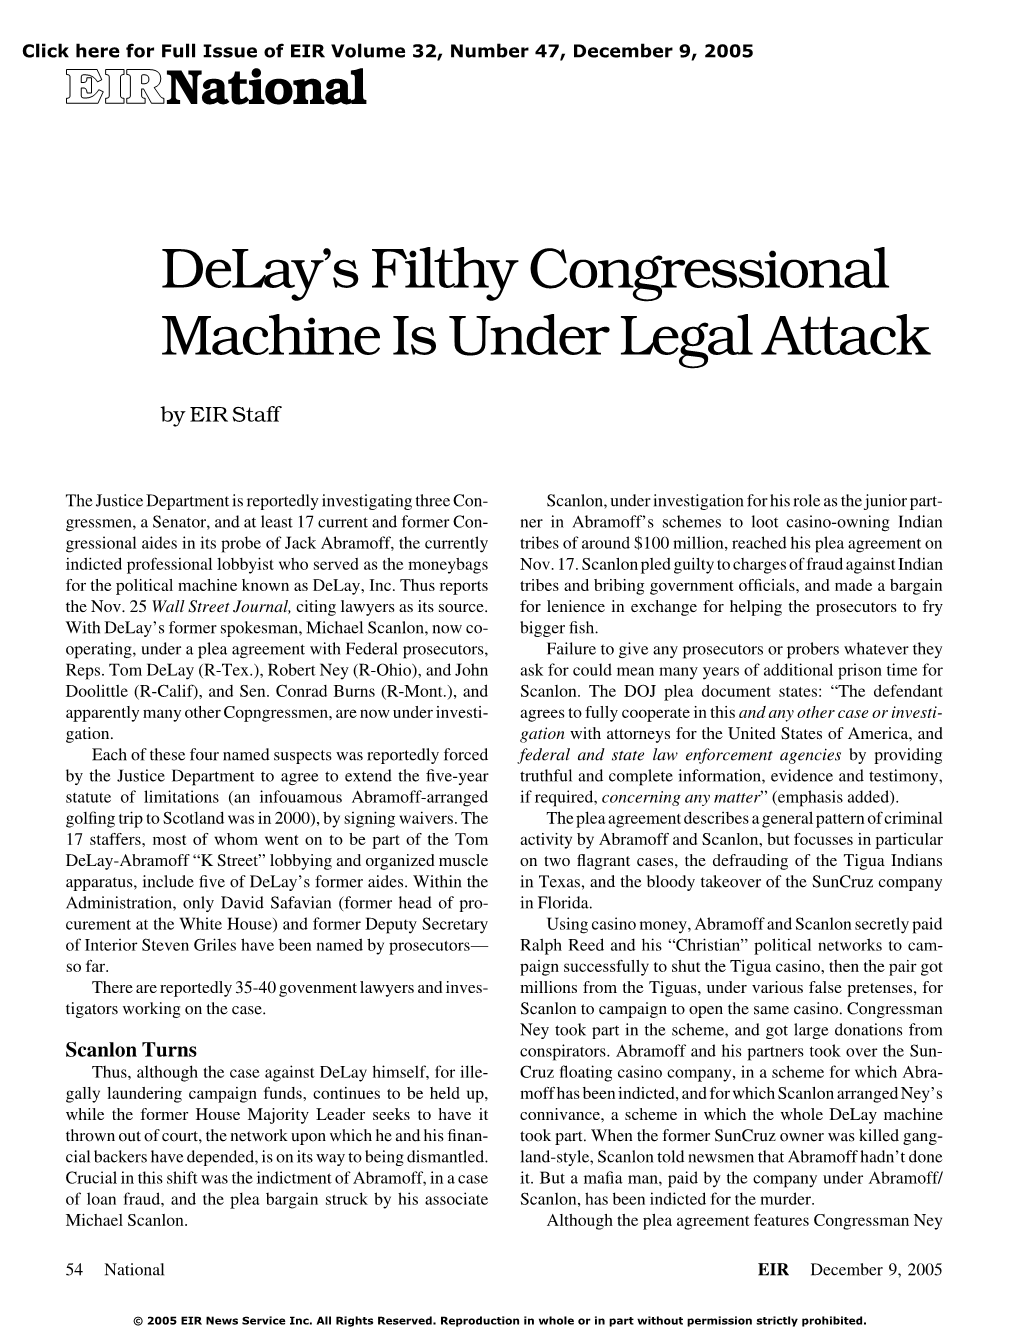 Delay's Filthy Congressional Machine Is Under Legal Attack